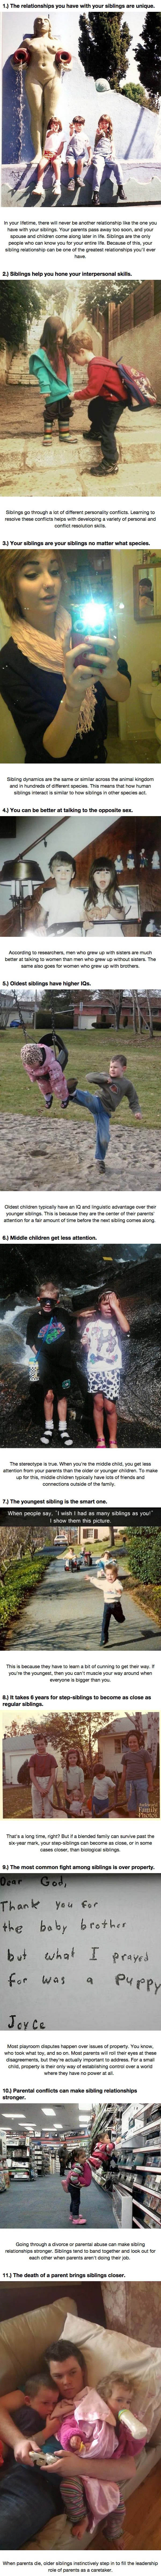 share these 11 awesome sibling facts with your brothers and sisters